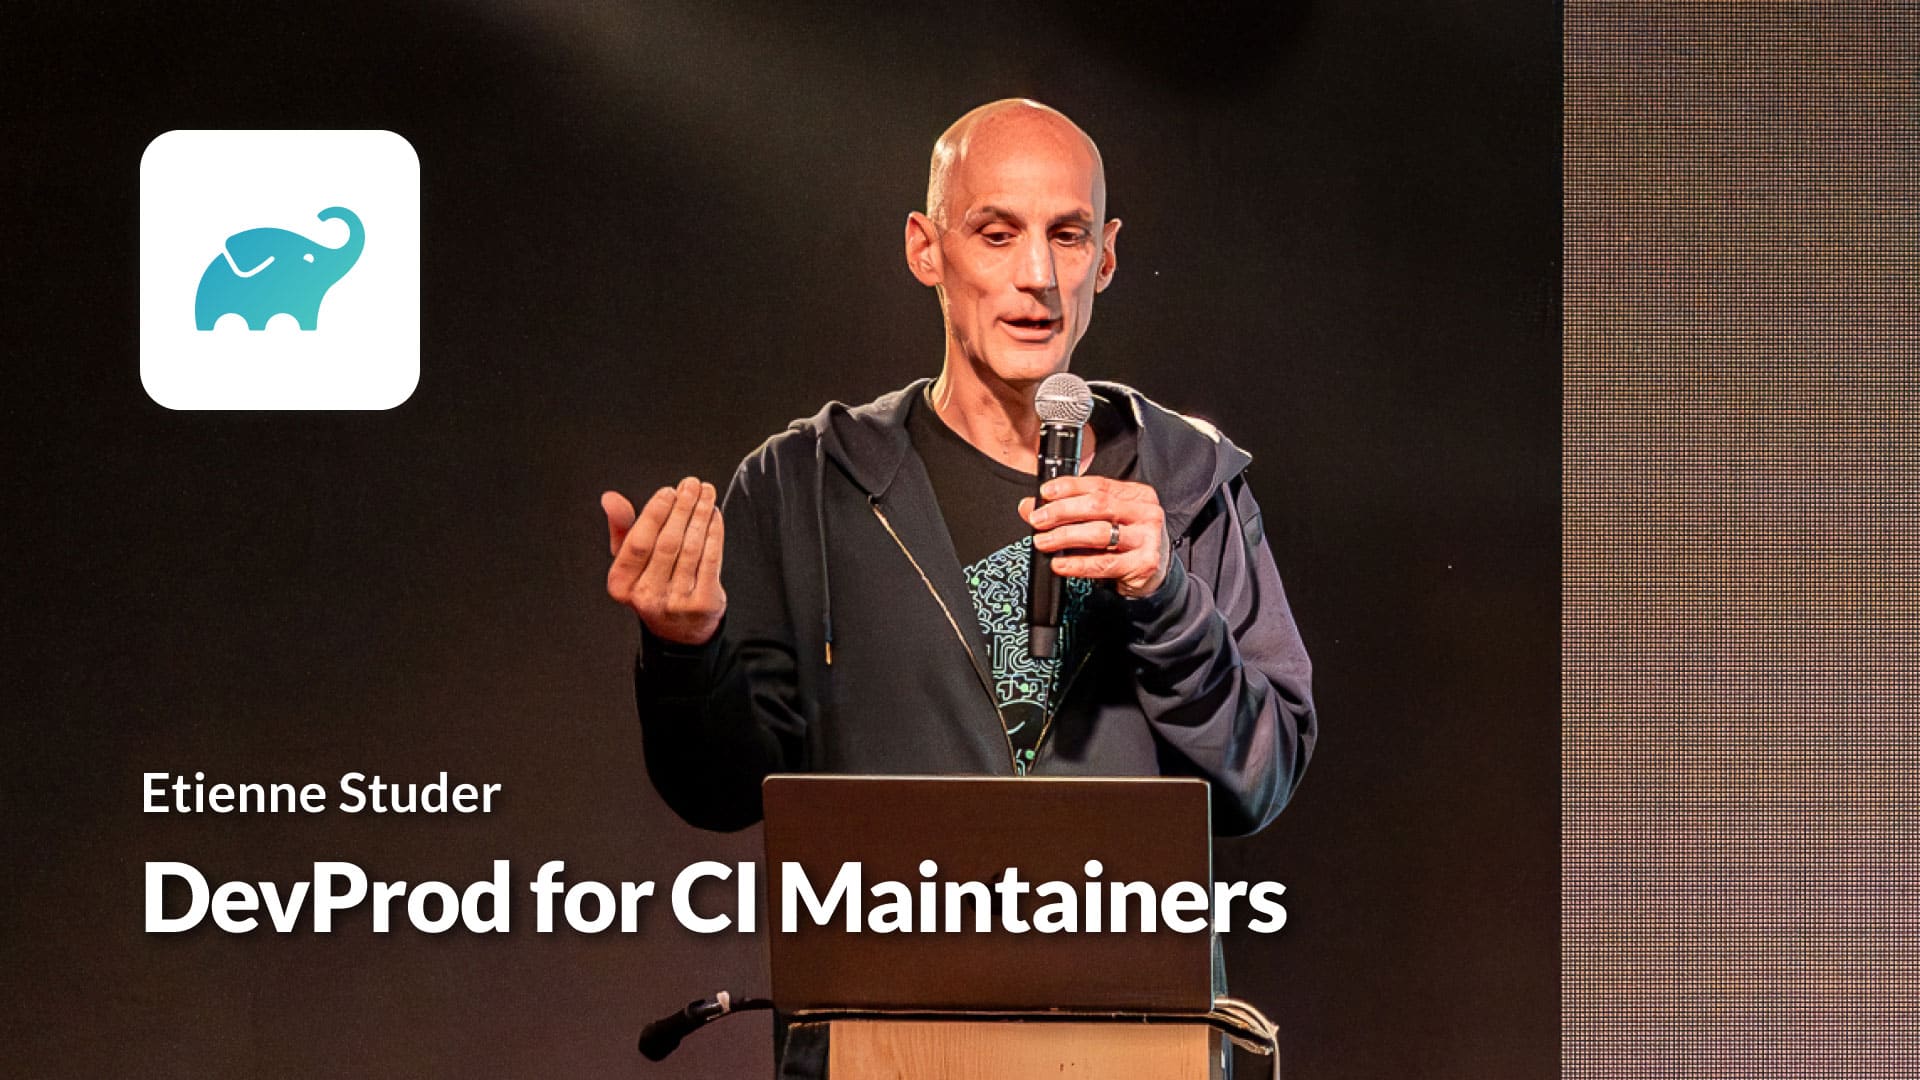 DevProd for CI Maintainers